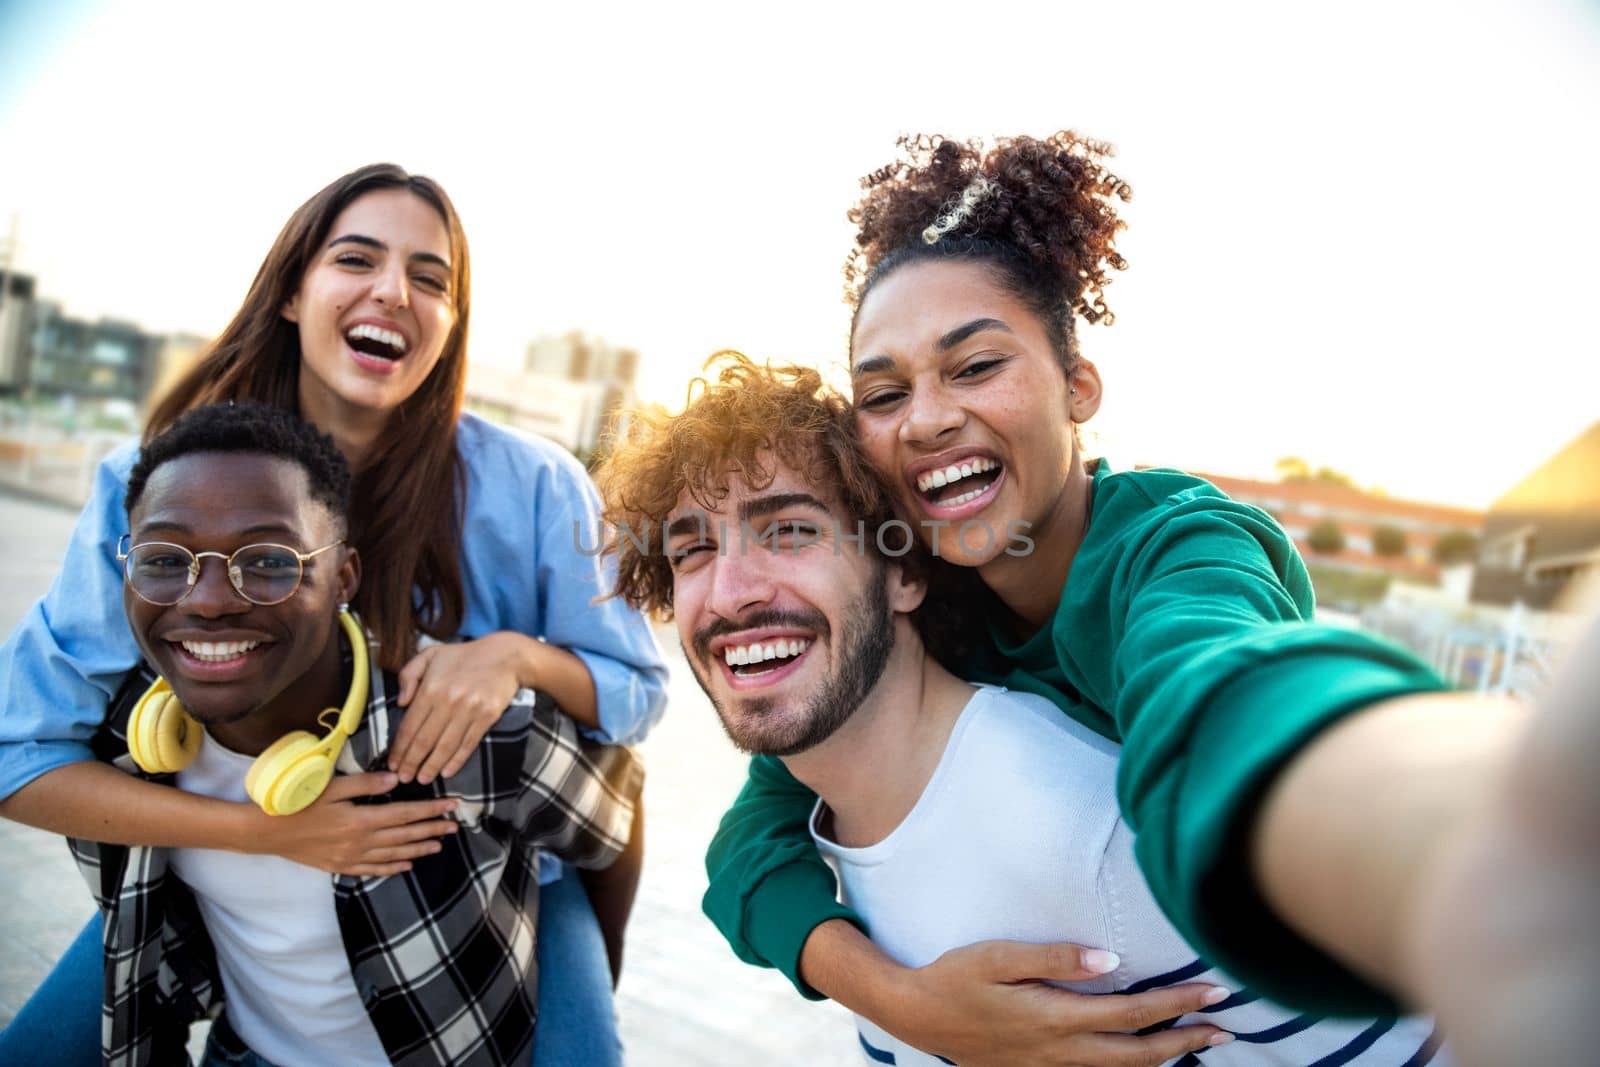 Multiracial happy friends having fun taking group selfie portrait on city street. Diverse people laugh together outdoors by Hoverstock